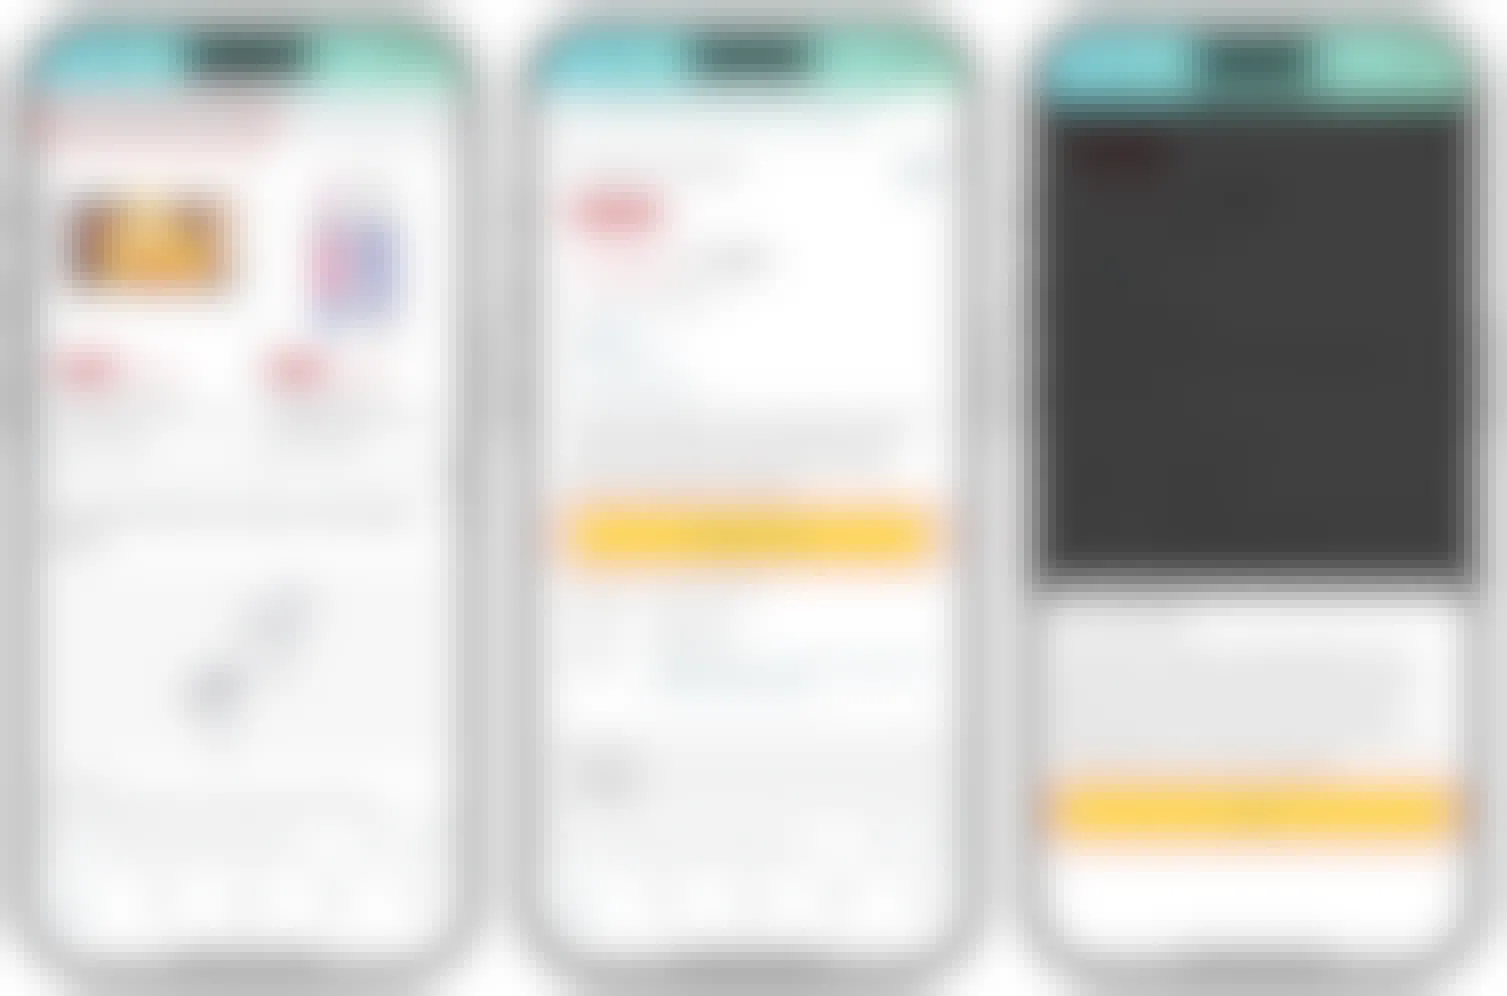 Three phones showing the steps to take in order to get an invitation to exclusive deals for Prime Day